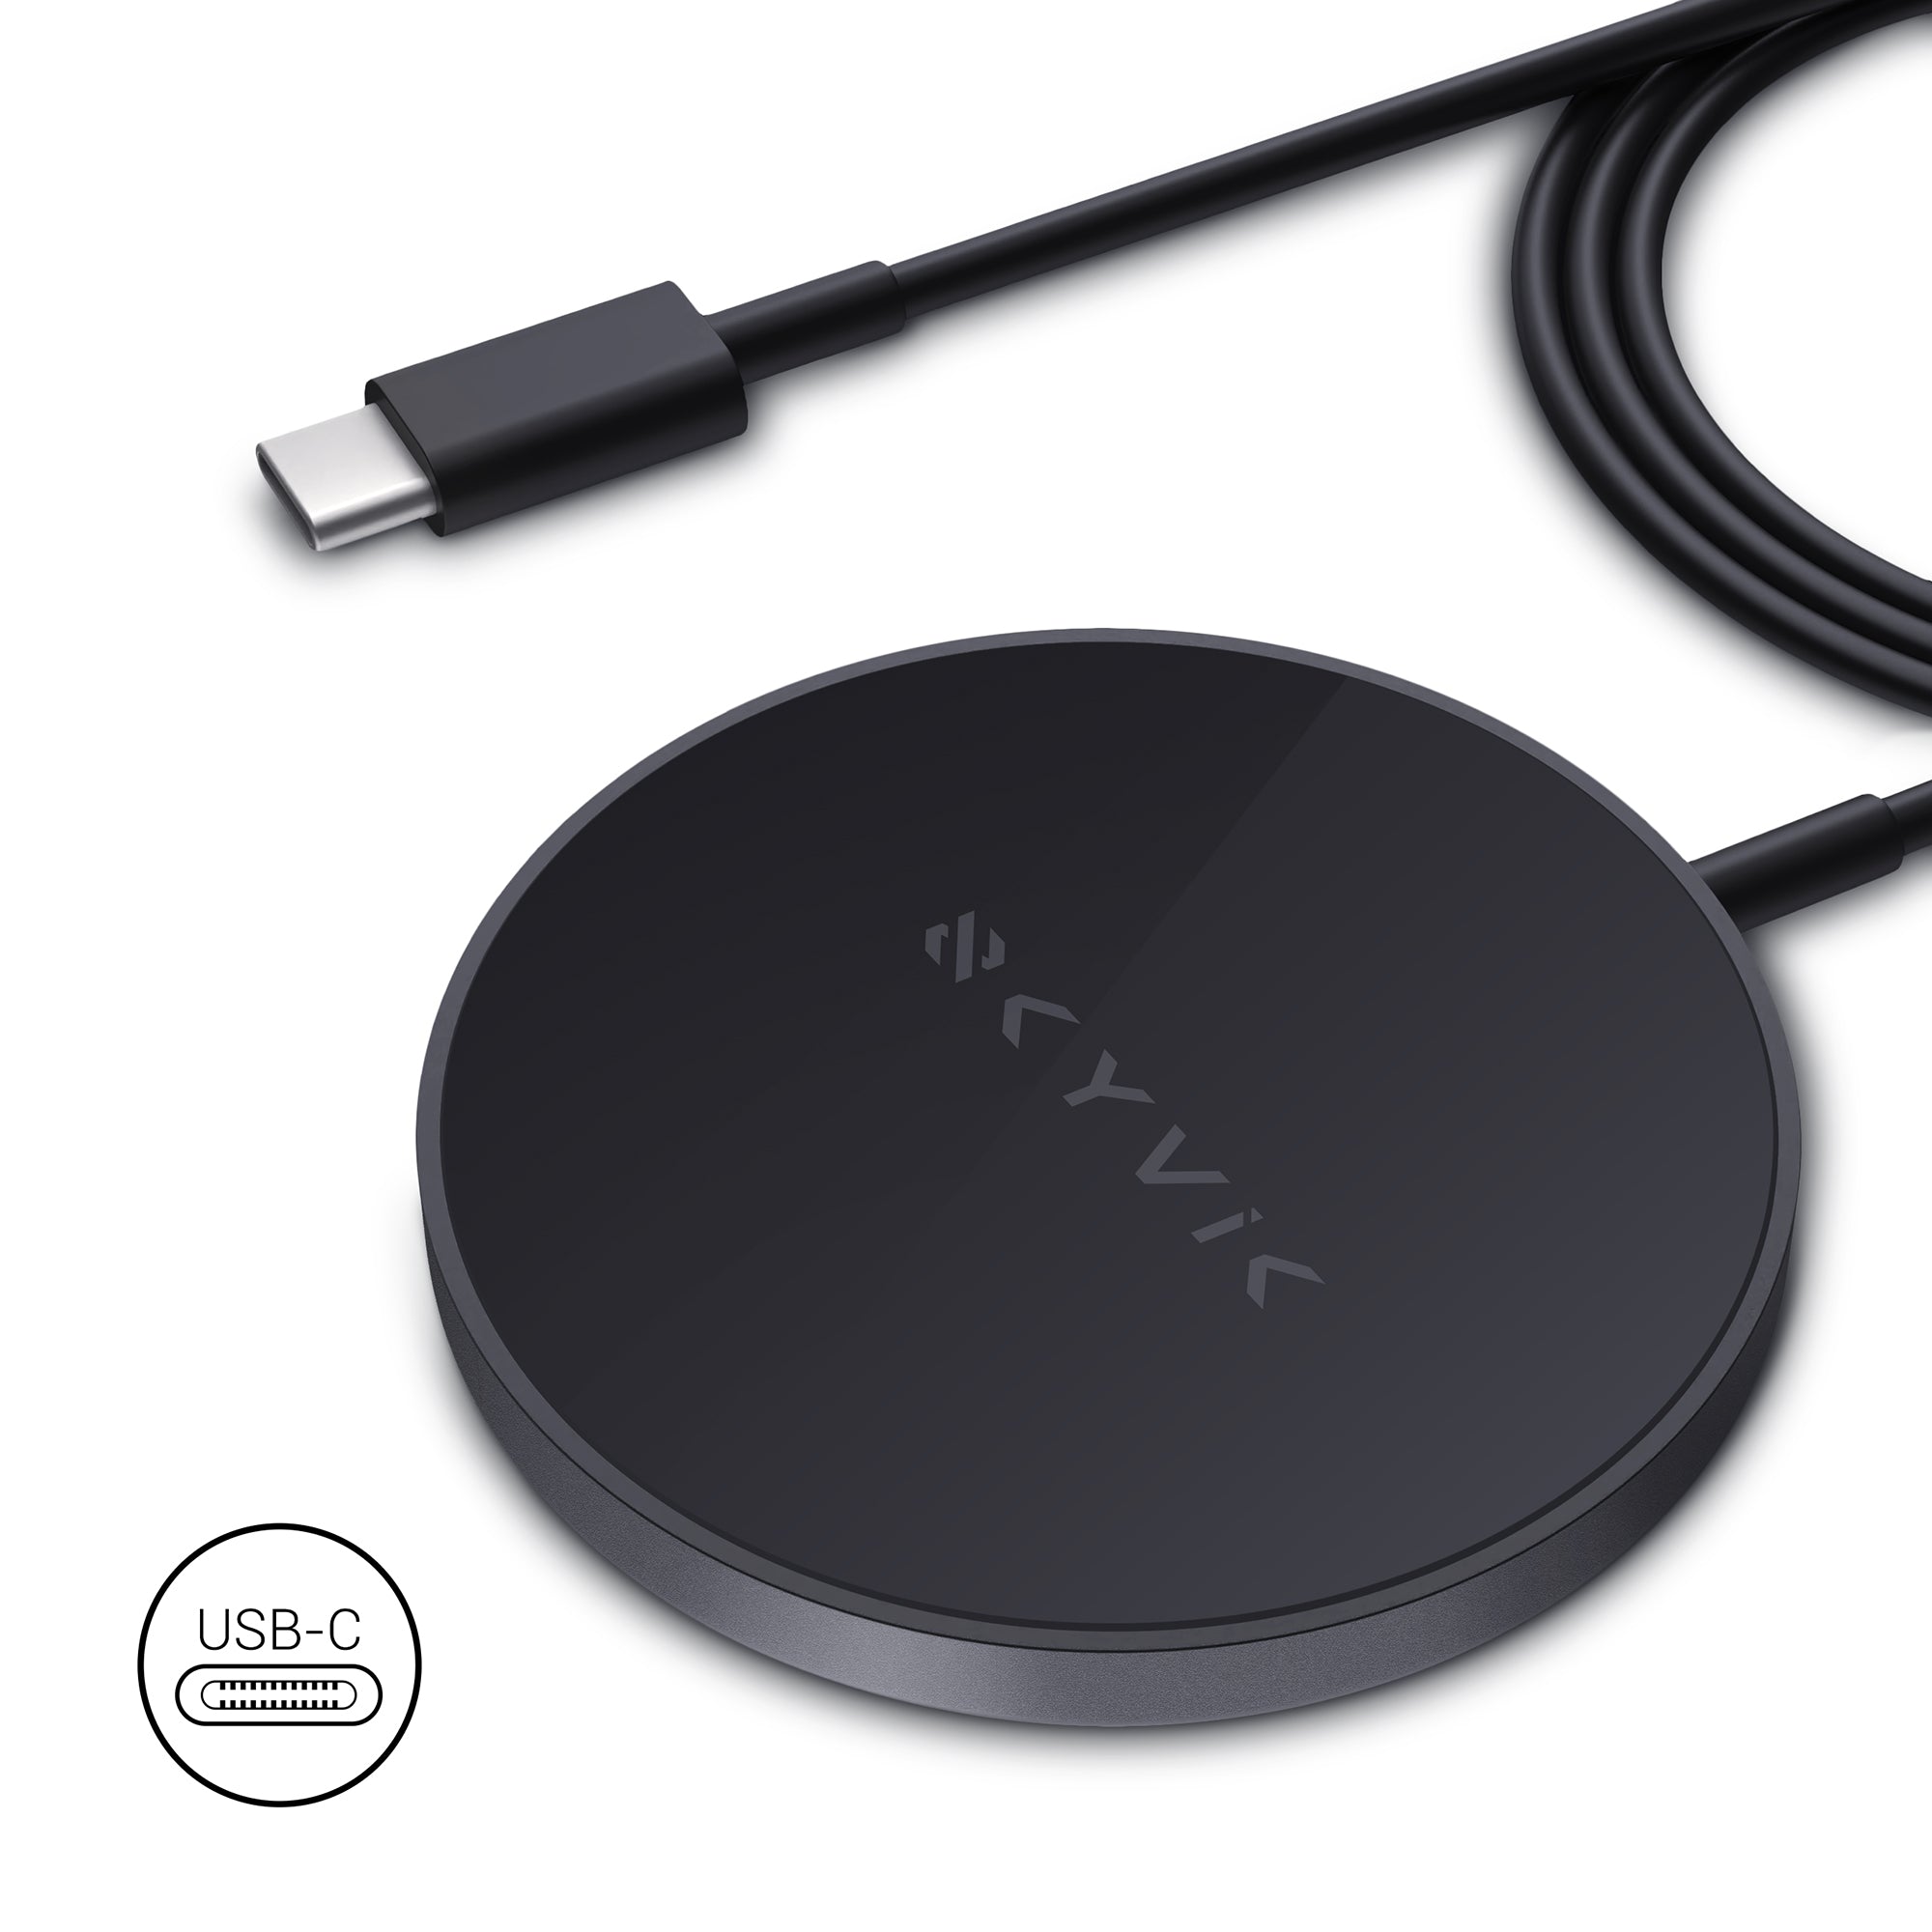 SKYVIK Beam Tap Magsafe Compatible 15W Fast Wireless Charging pad for iPhone 12, 13 & 14 Series - Black